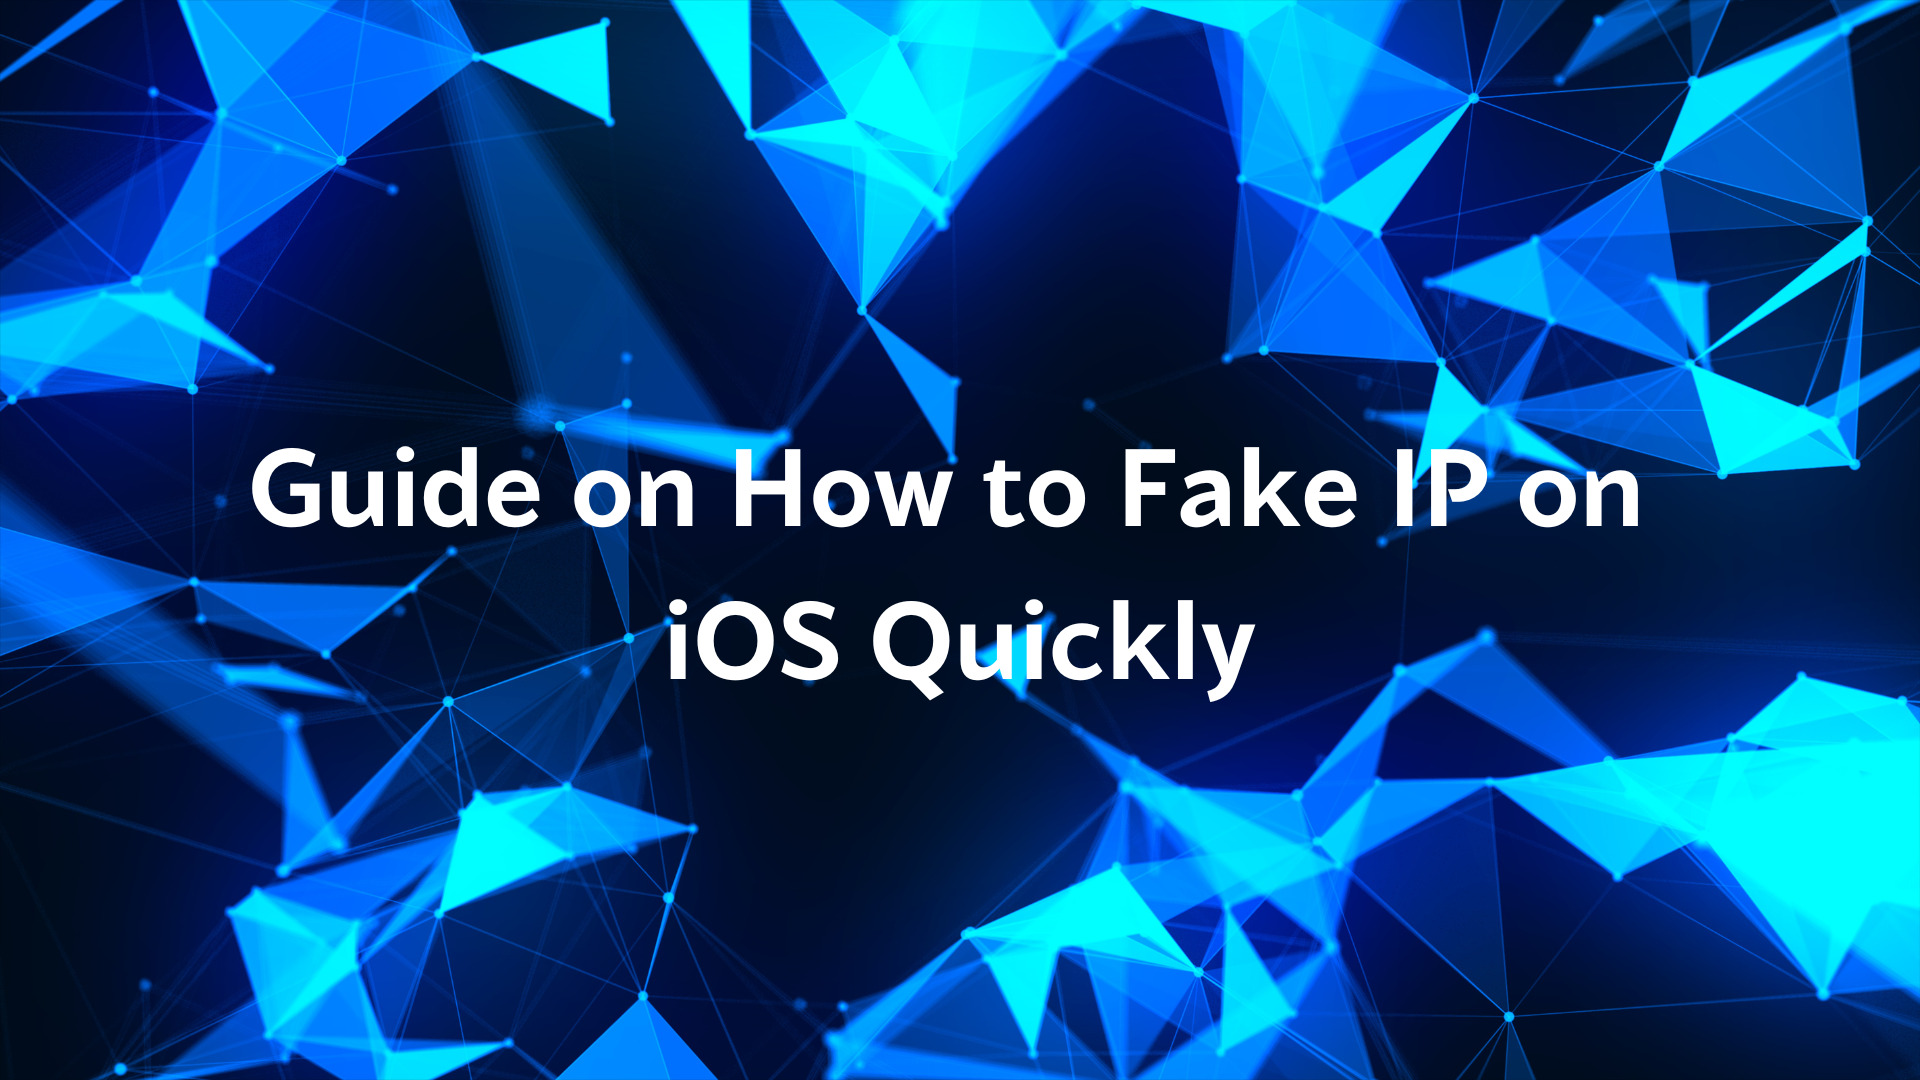 Guide on How to Fake IP on iOS Quickly